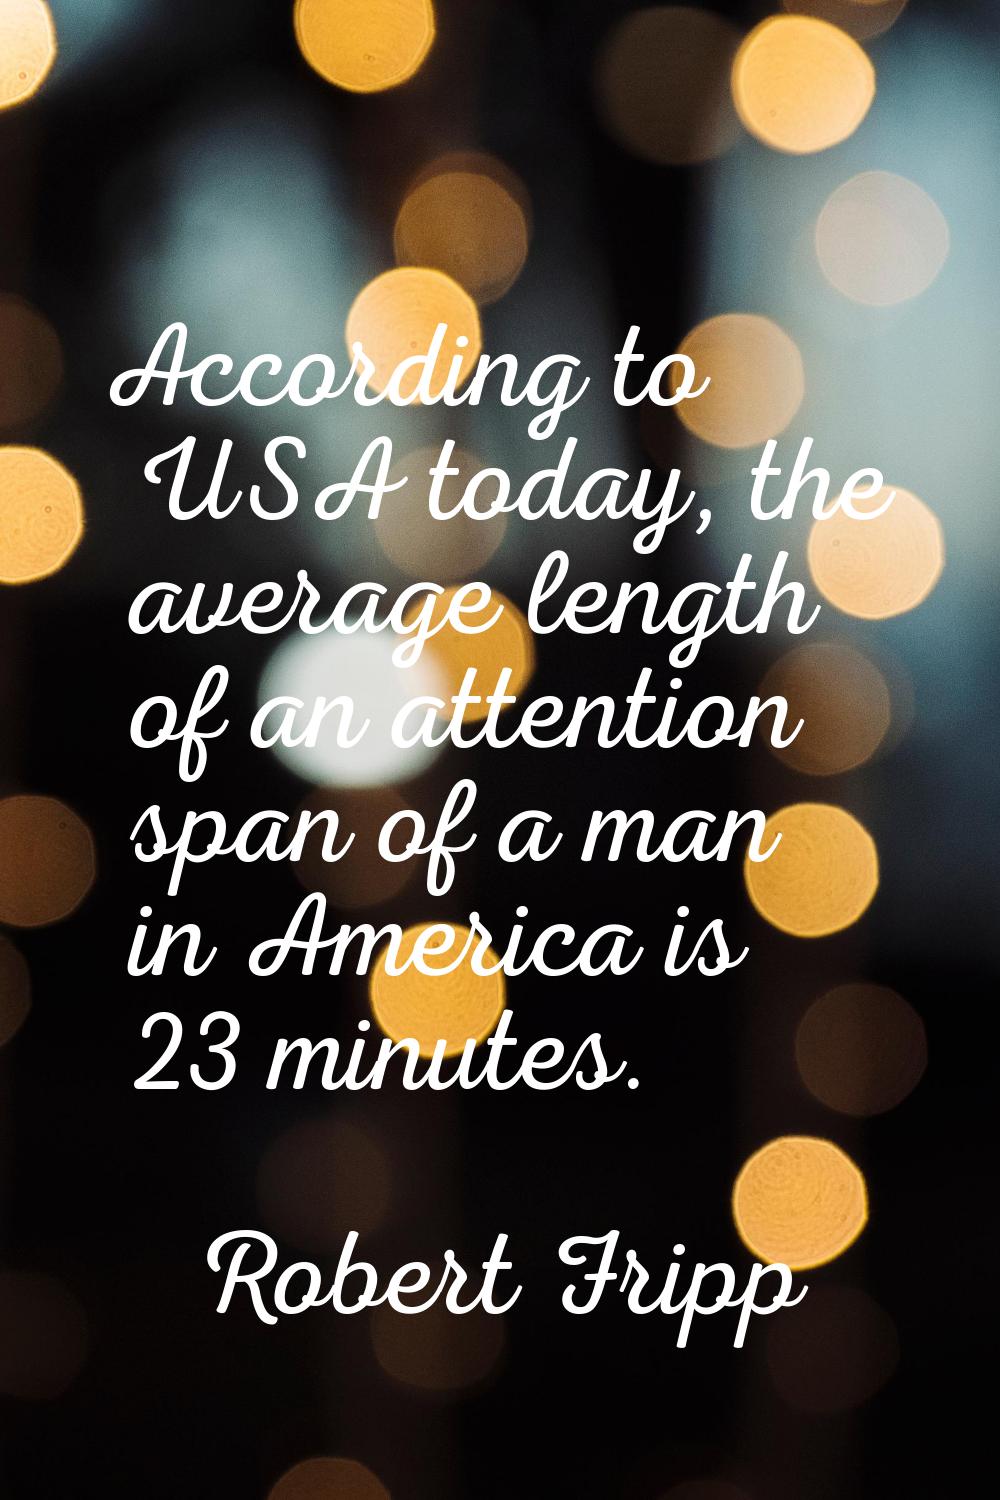 According to USA today, the average length of an attention span of a man in America is 23 minutes.